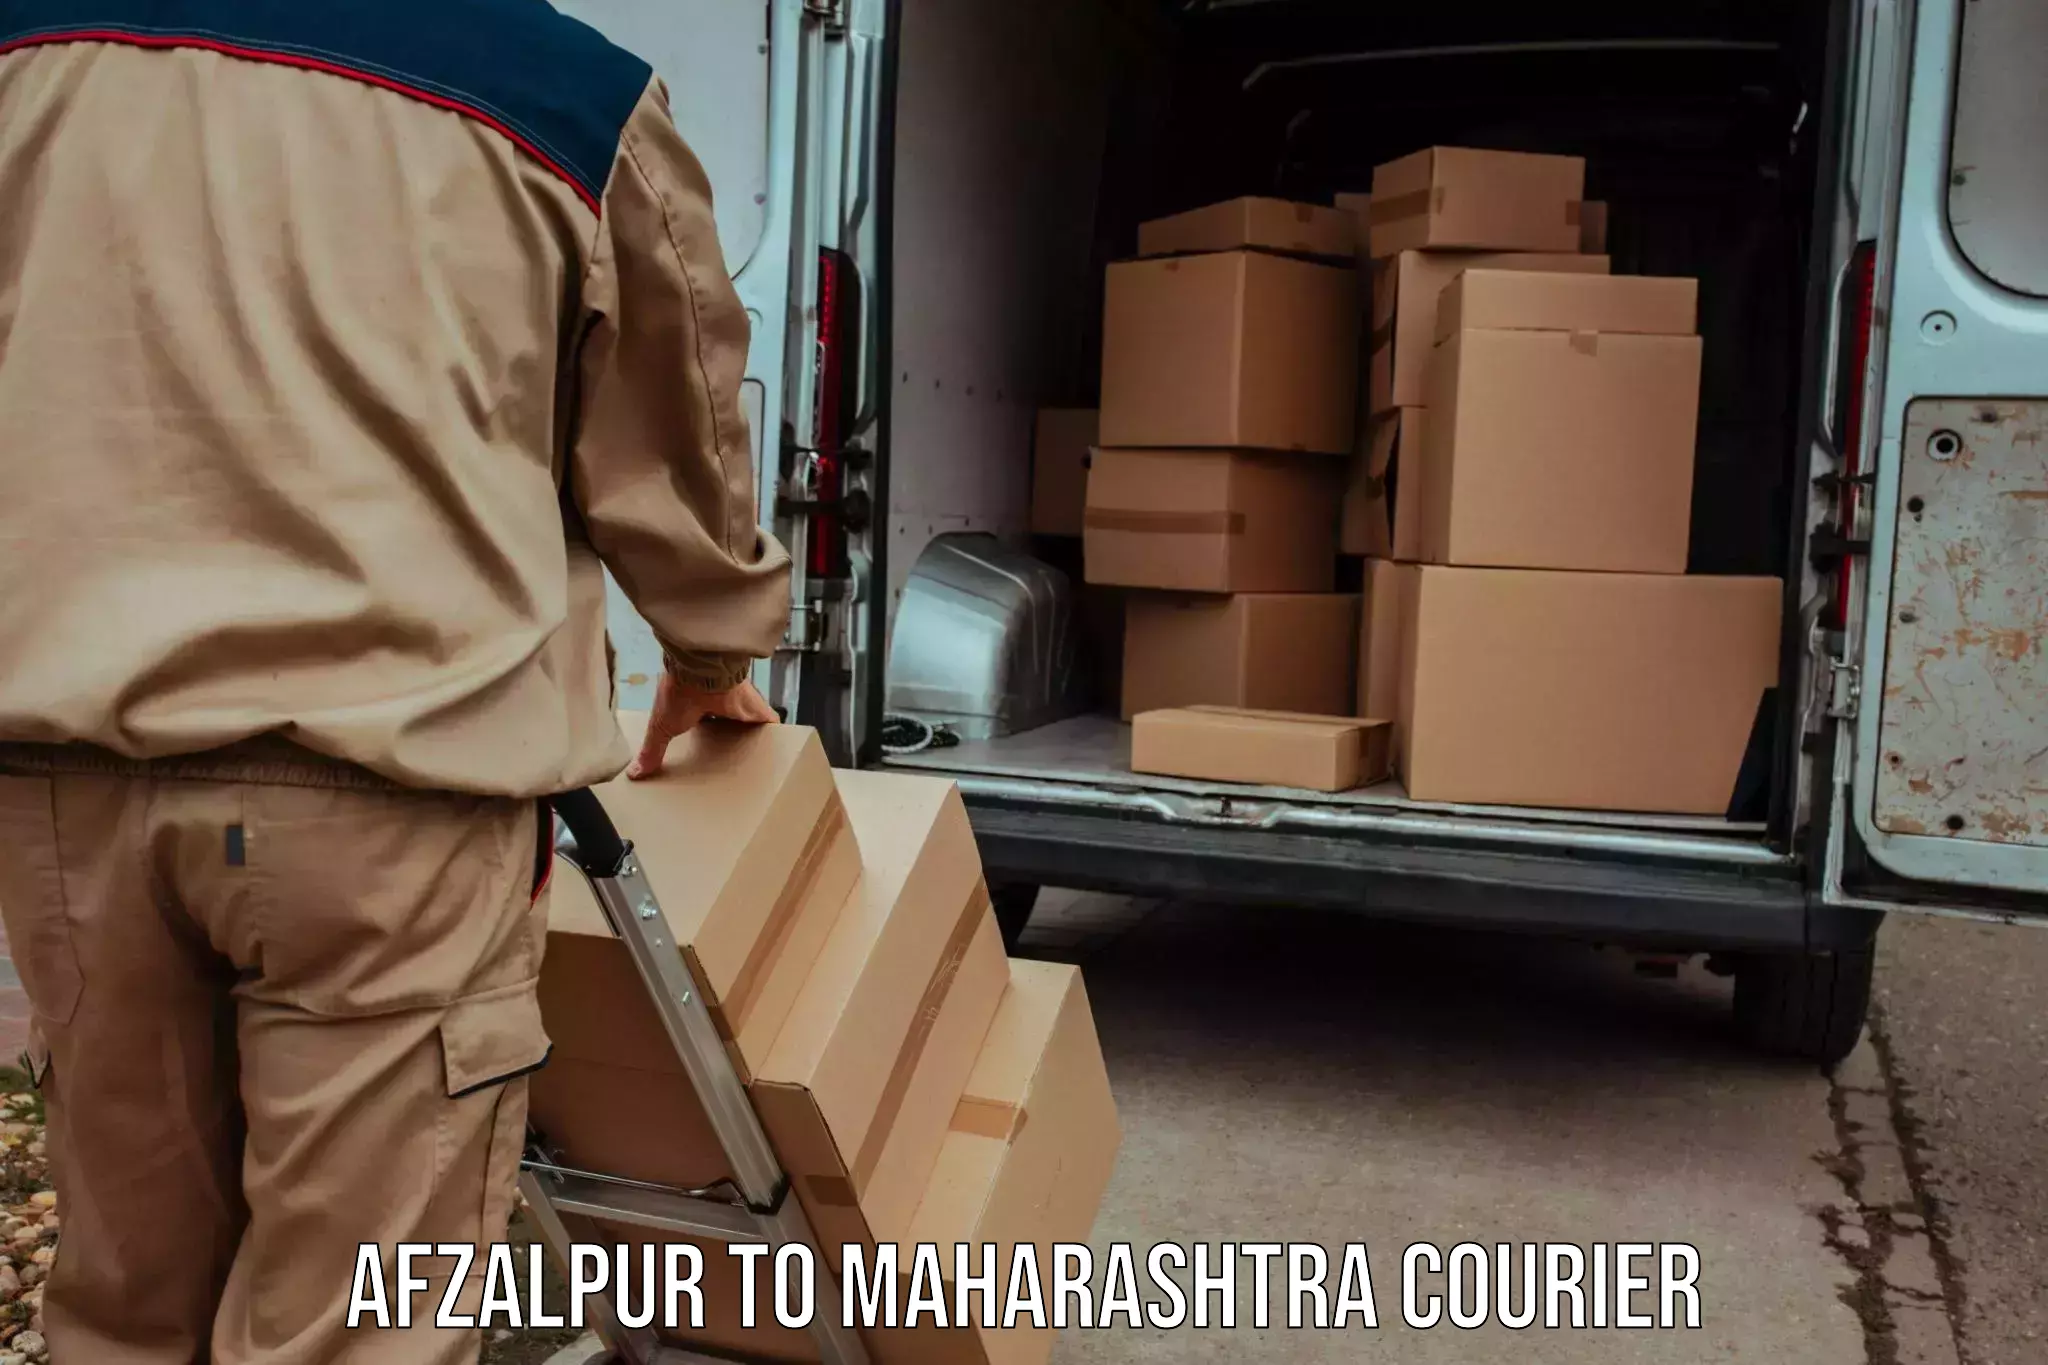 Automated parcel services Afzalpur to Kalyan